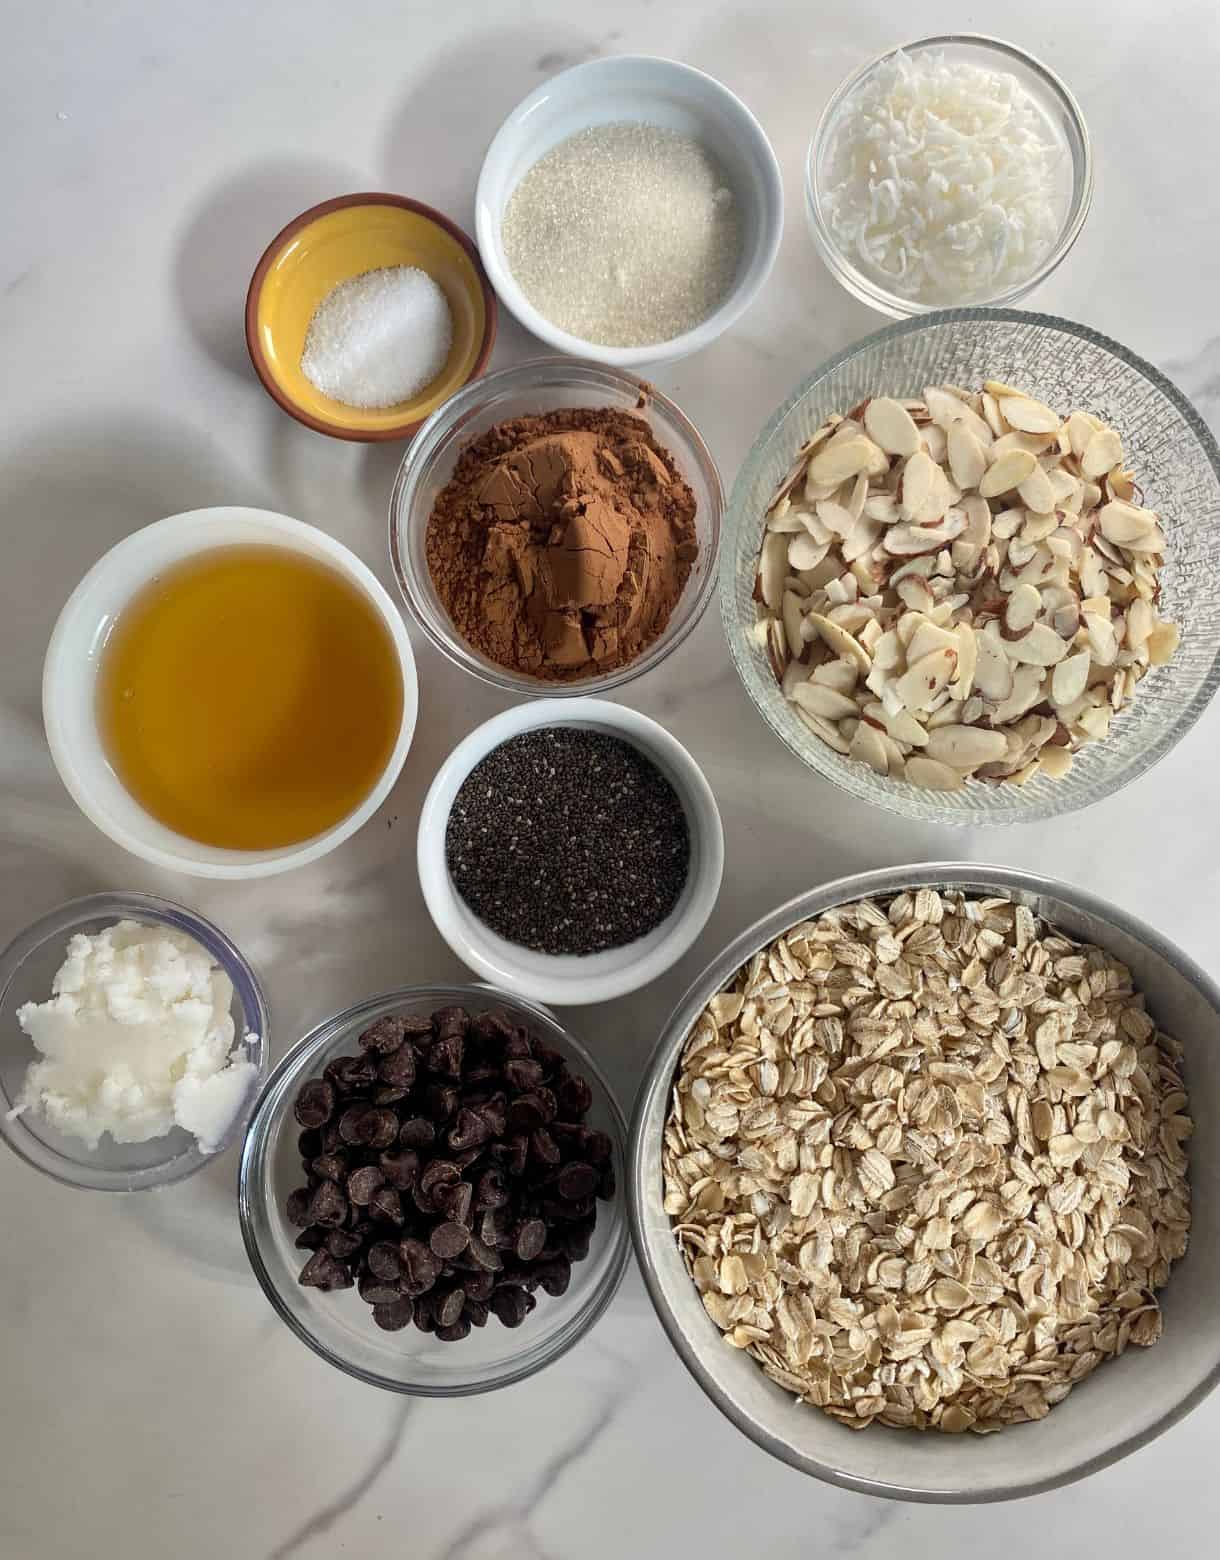 Ingredients for Dark Chocolate Granola. Rolled oats, sliced almonds, chia seeds, shredded coconut, cocoa powder, agave, salt, sugar, coconut oil and chocolate chips.